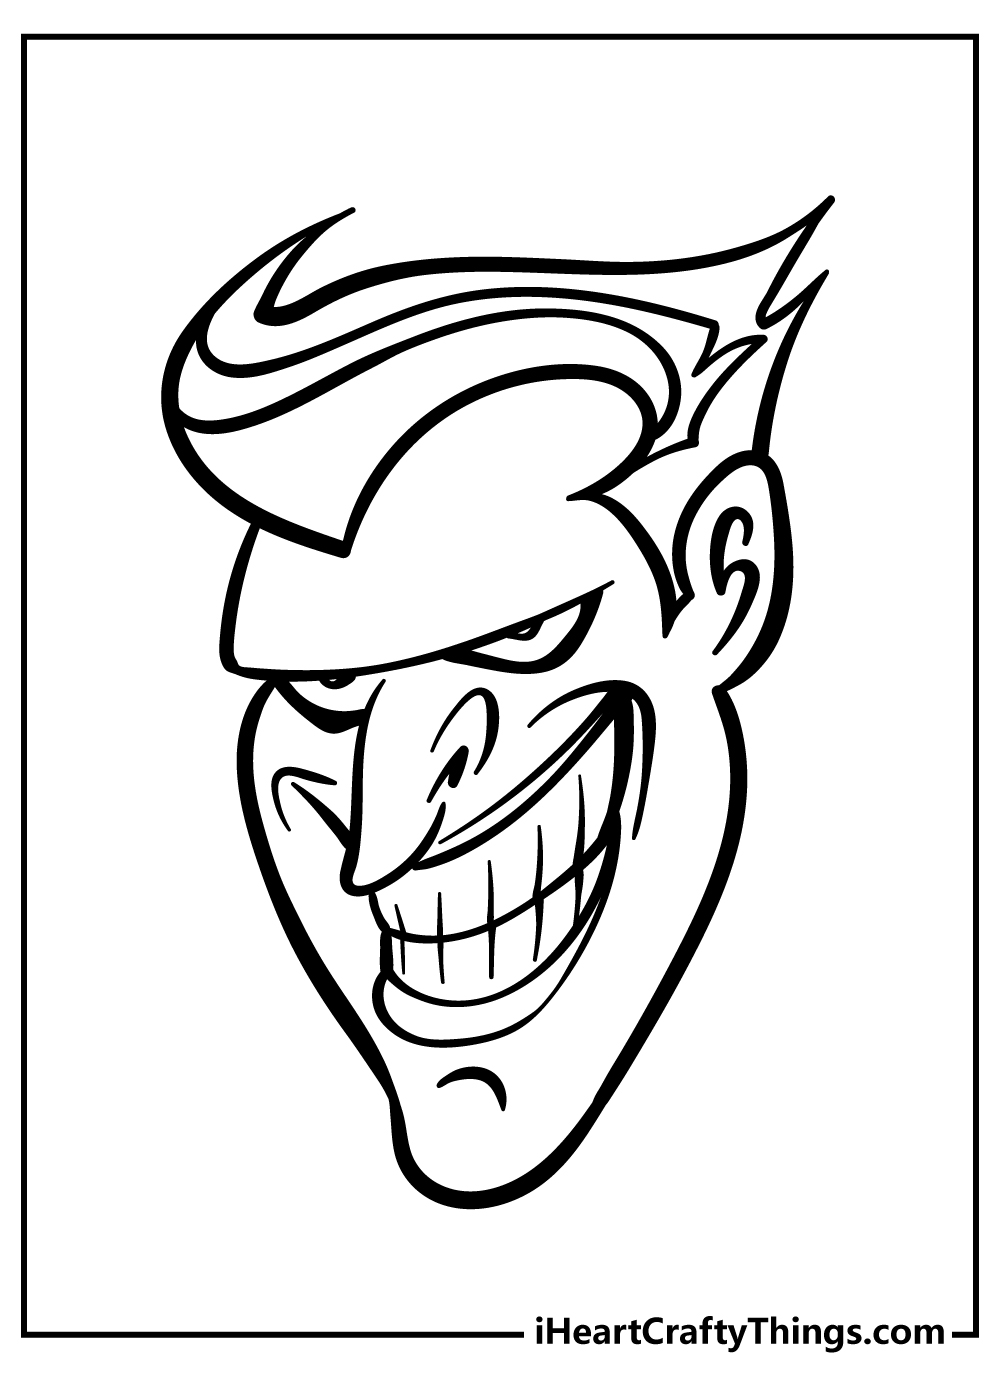 Joker Coloring Pages for kids free download